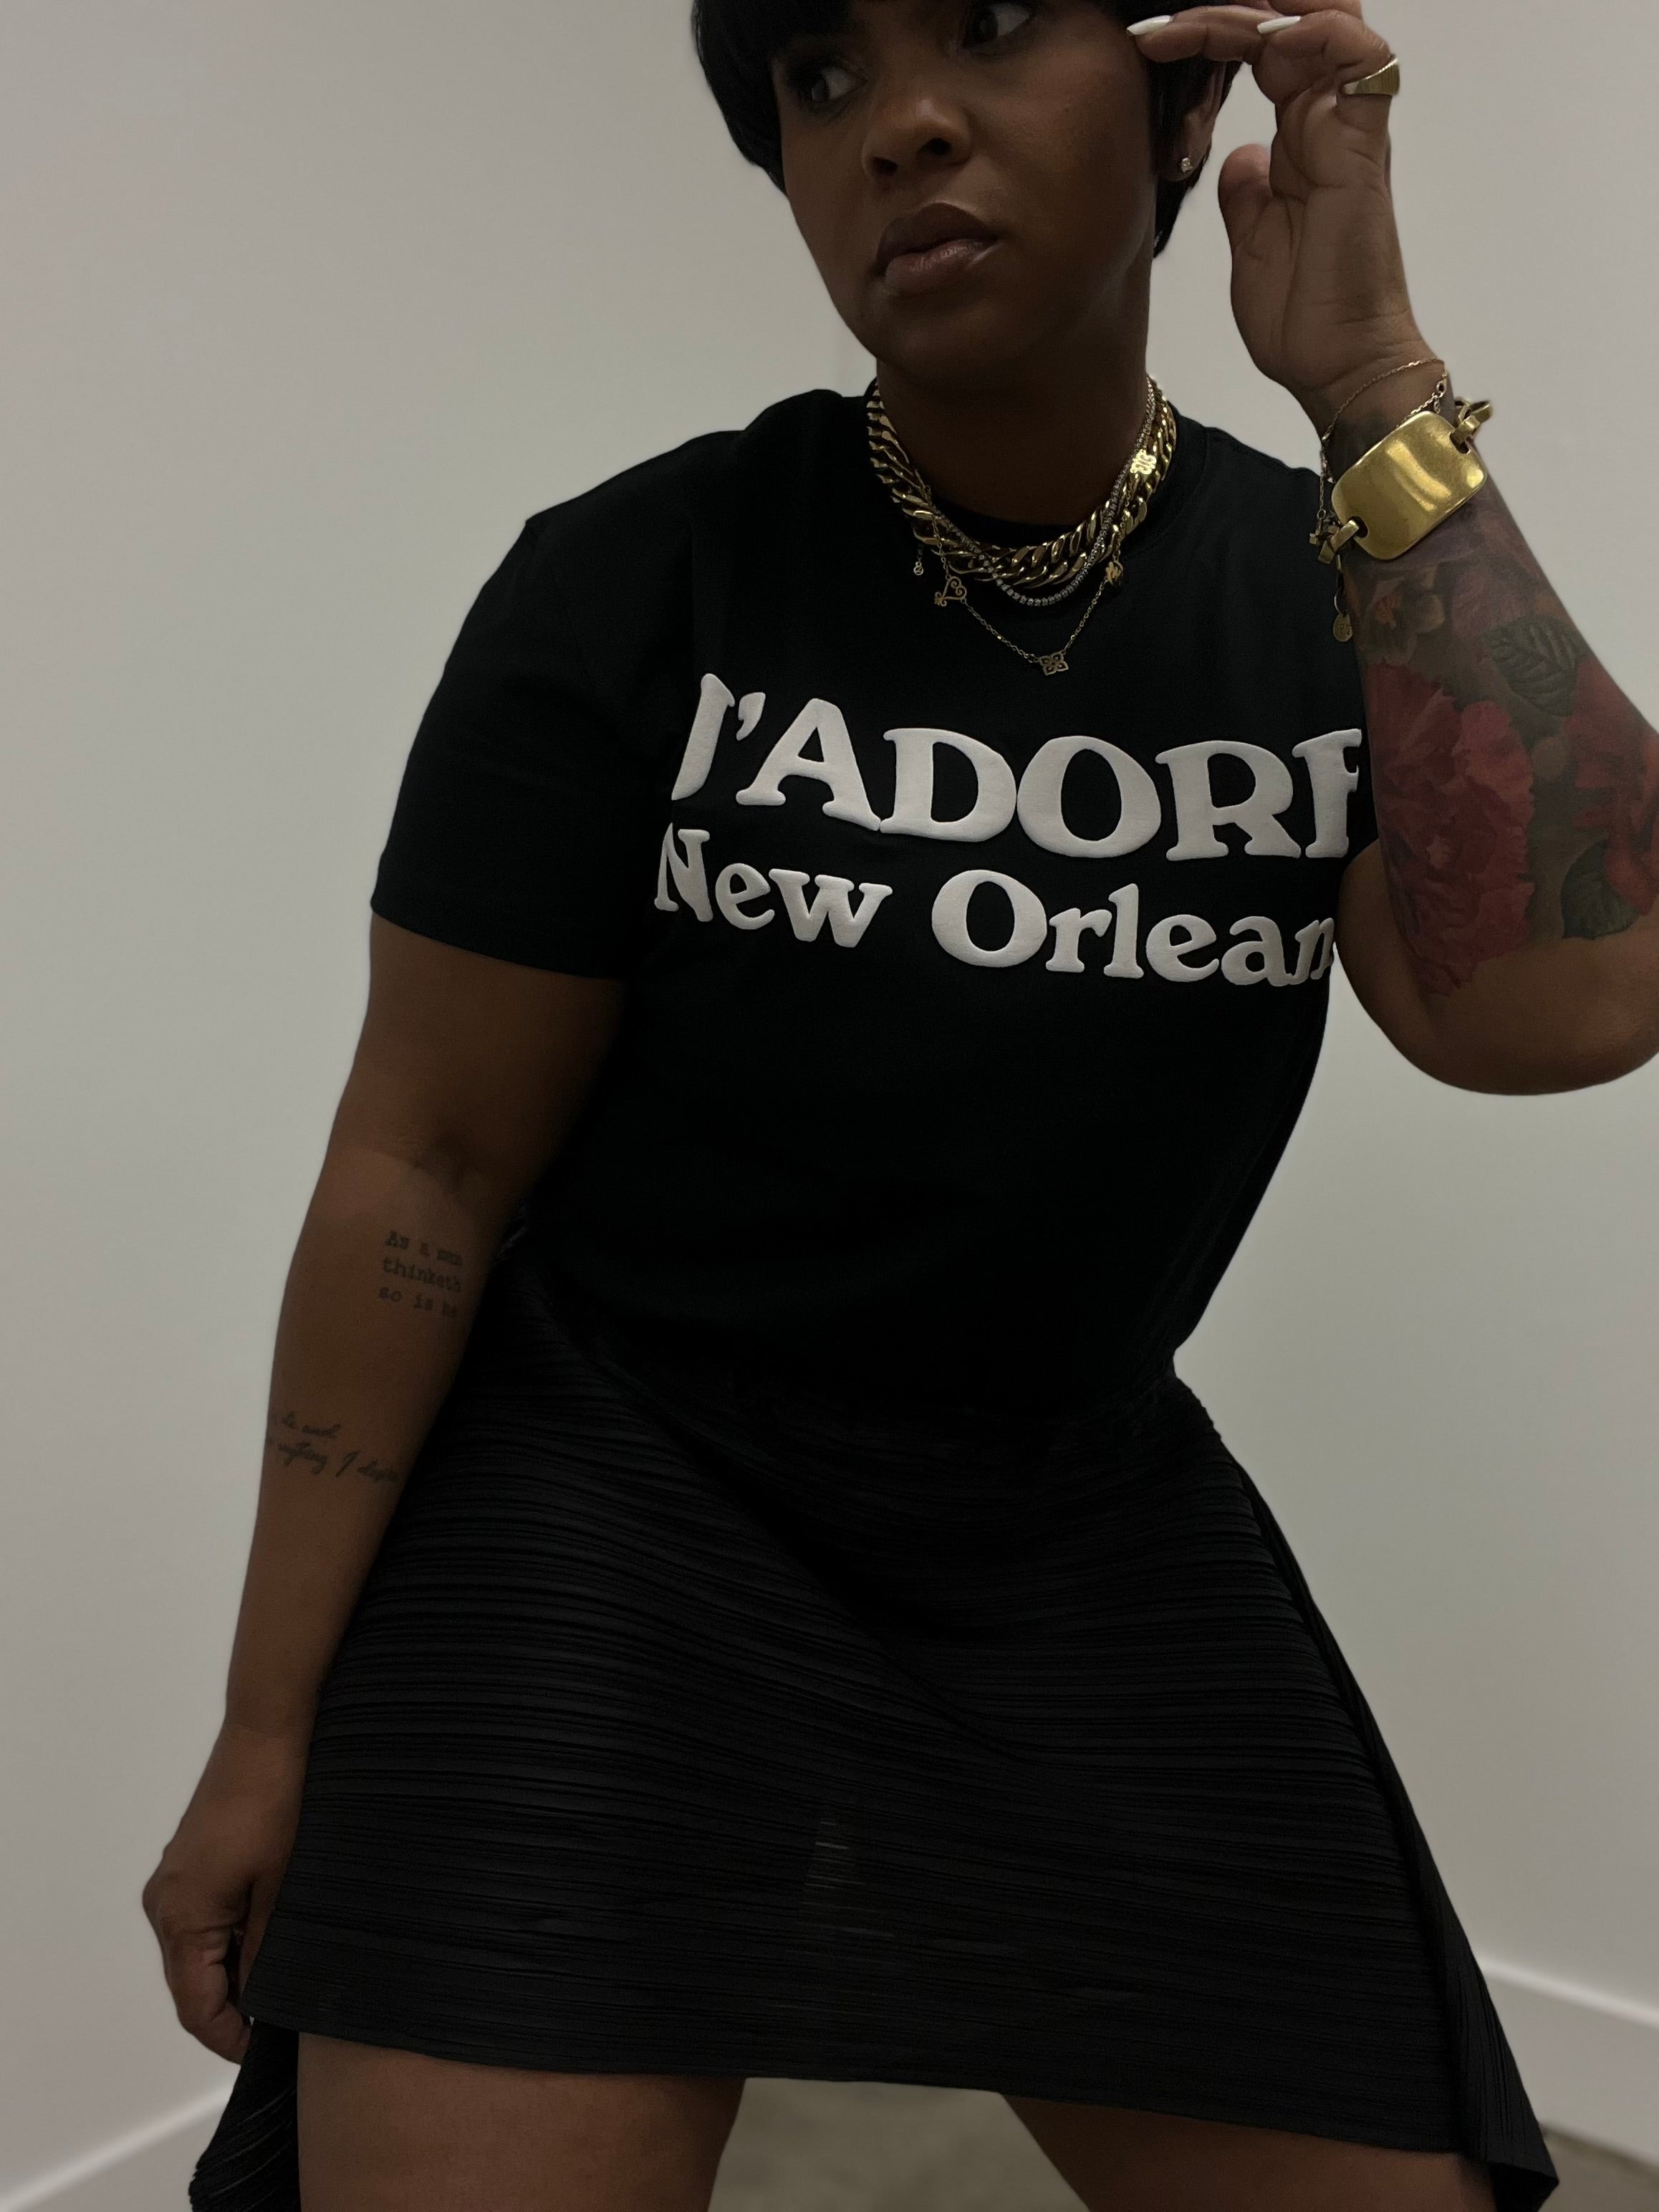 J’ADORE New Orleans Tee